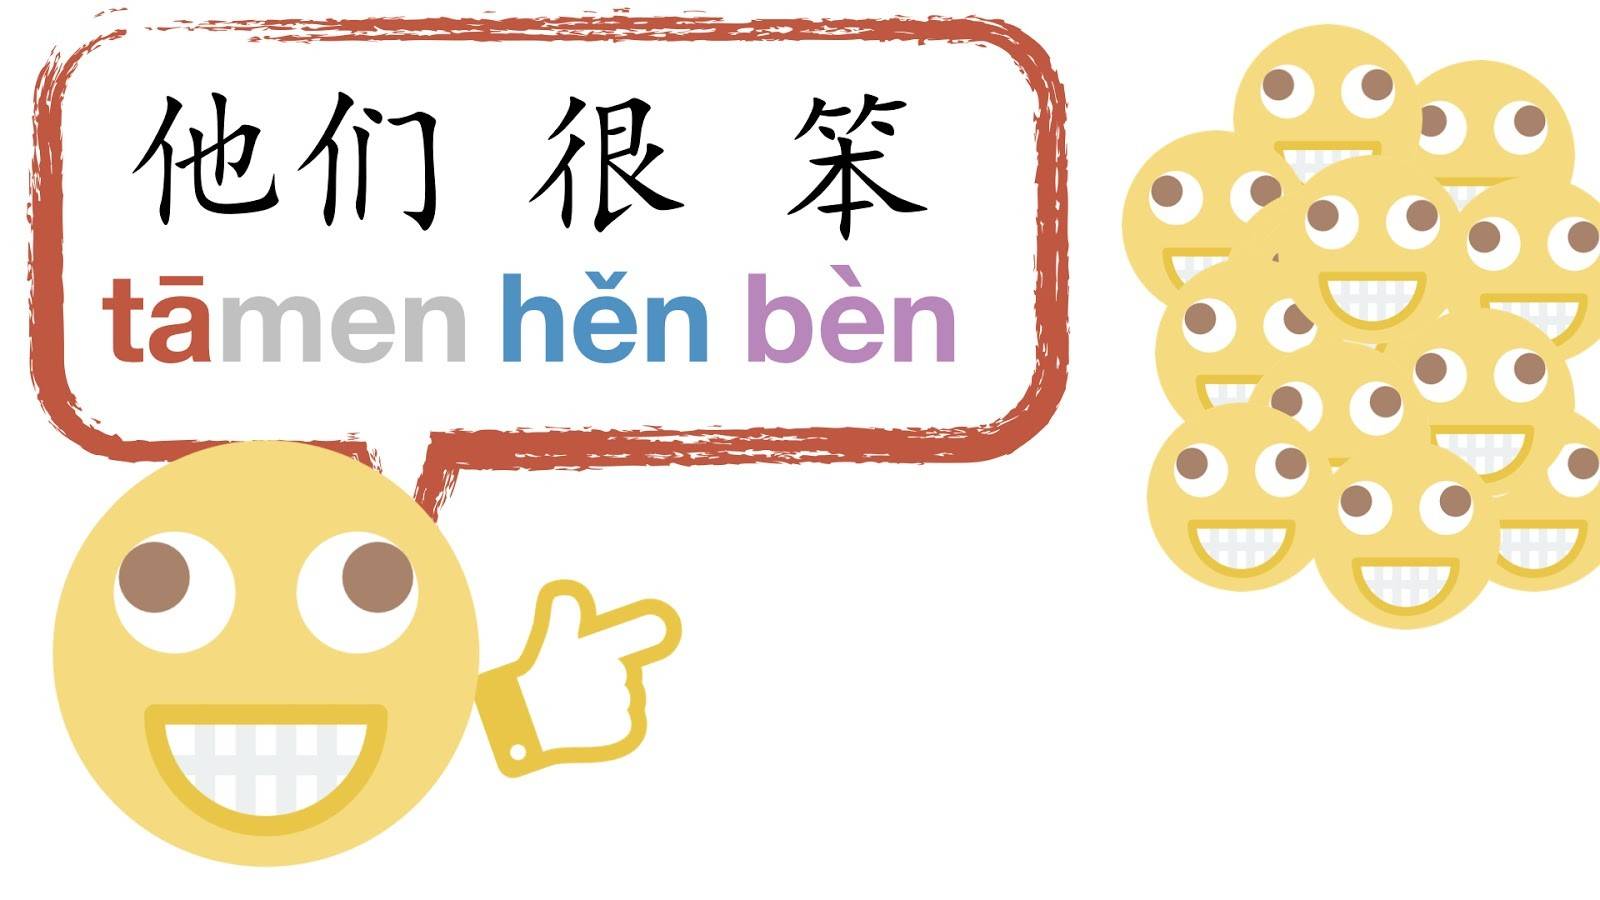 intensify in Chinese, Intensify in Chinese with 很 hěn